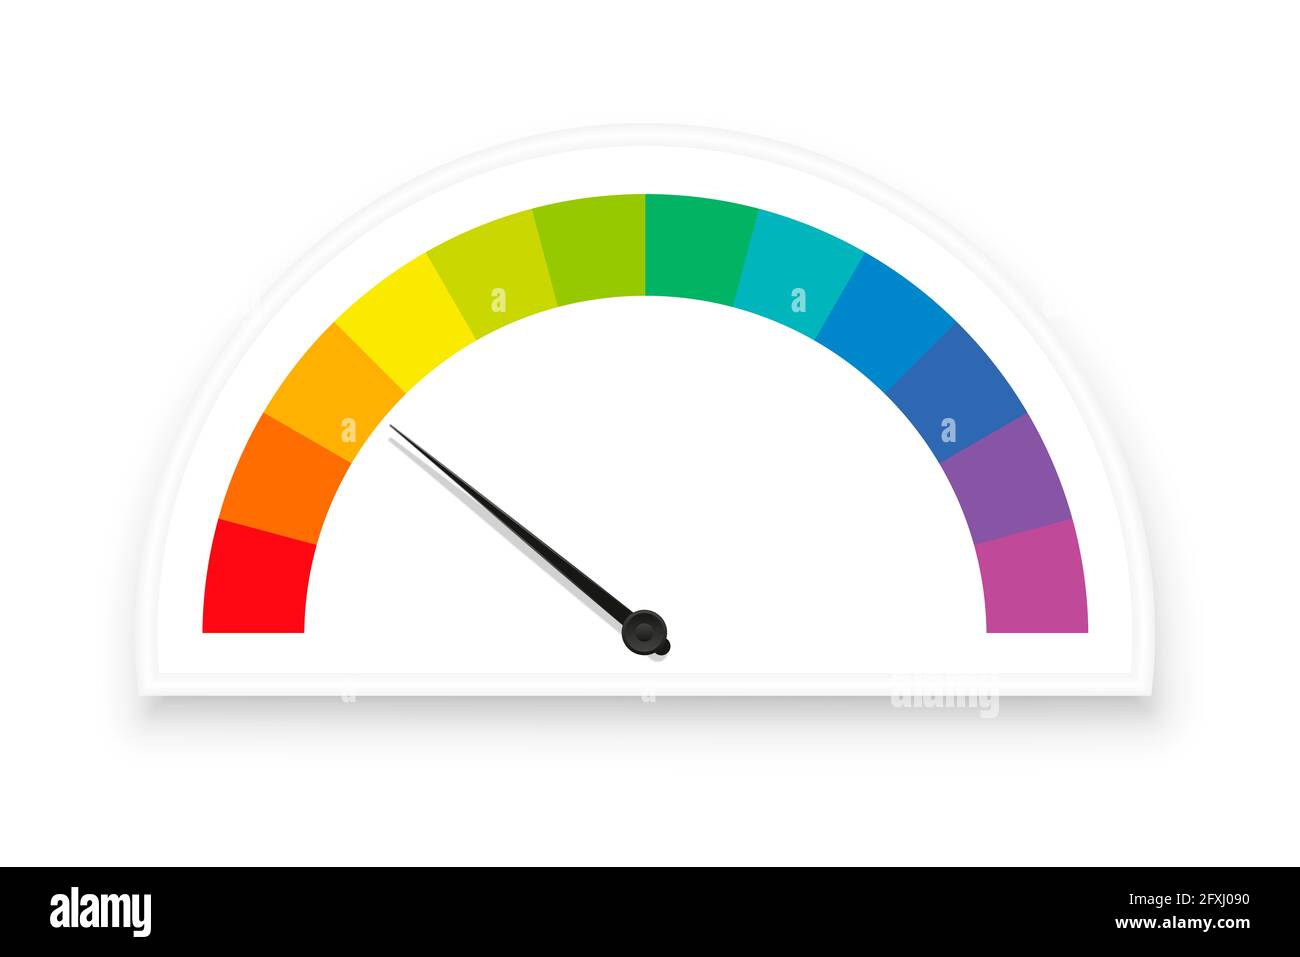 Rainbow colored gauge, speedometer with colorful scale fields, subdivisions as rating indicators, measuring display instrument with black pointer. Stock Photo